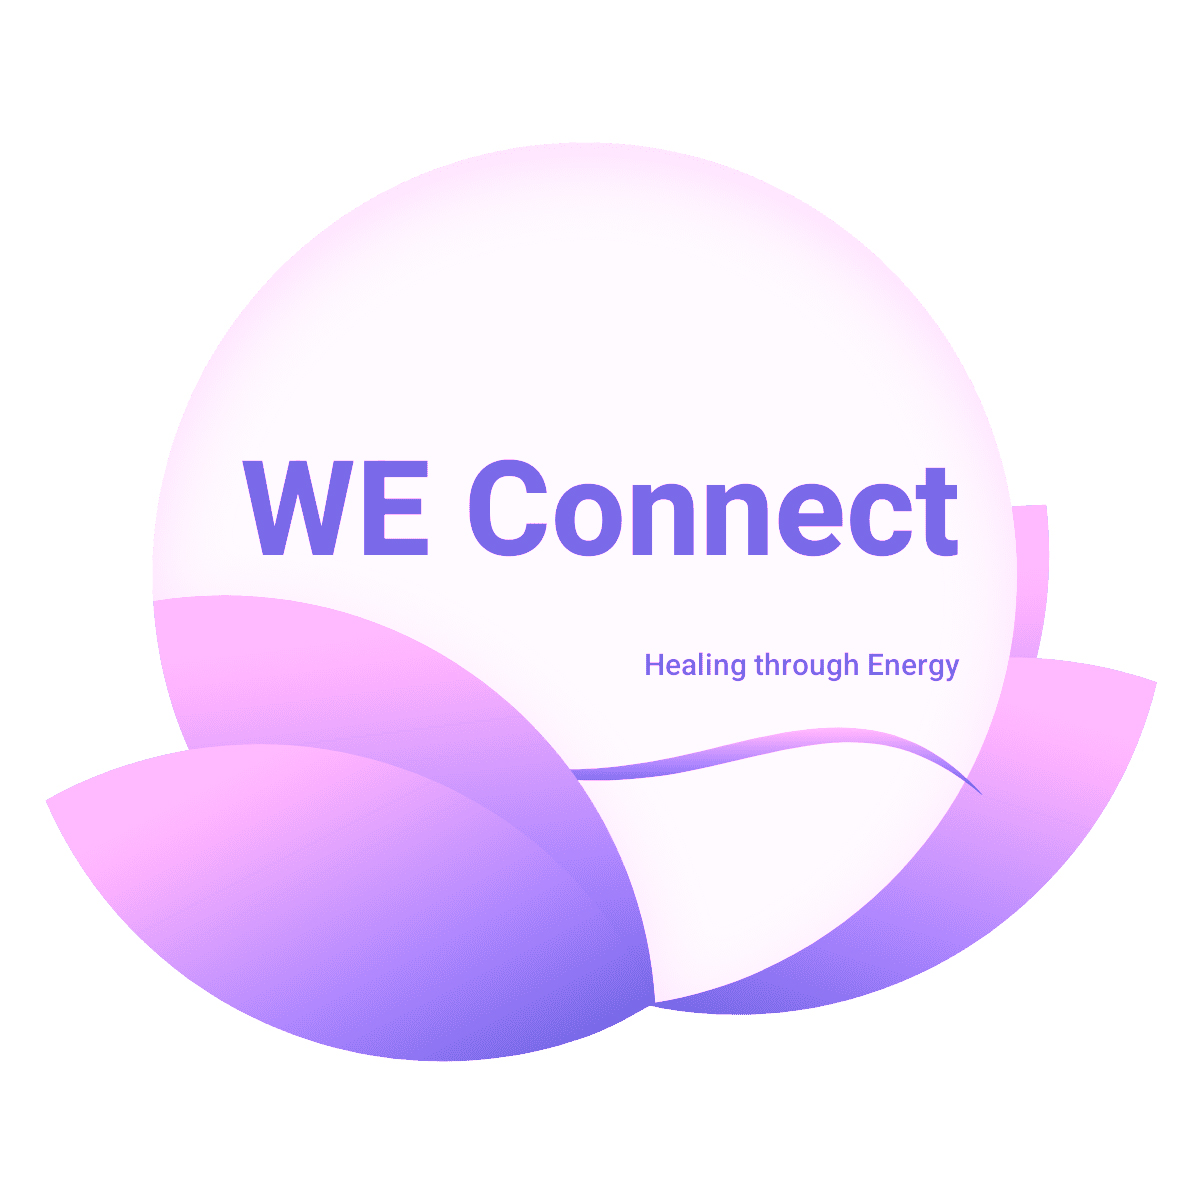 WE Connect - Healing through Energy